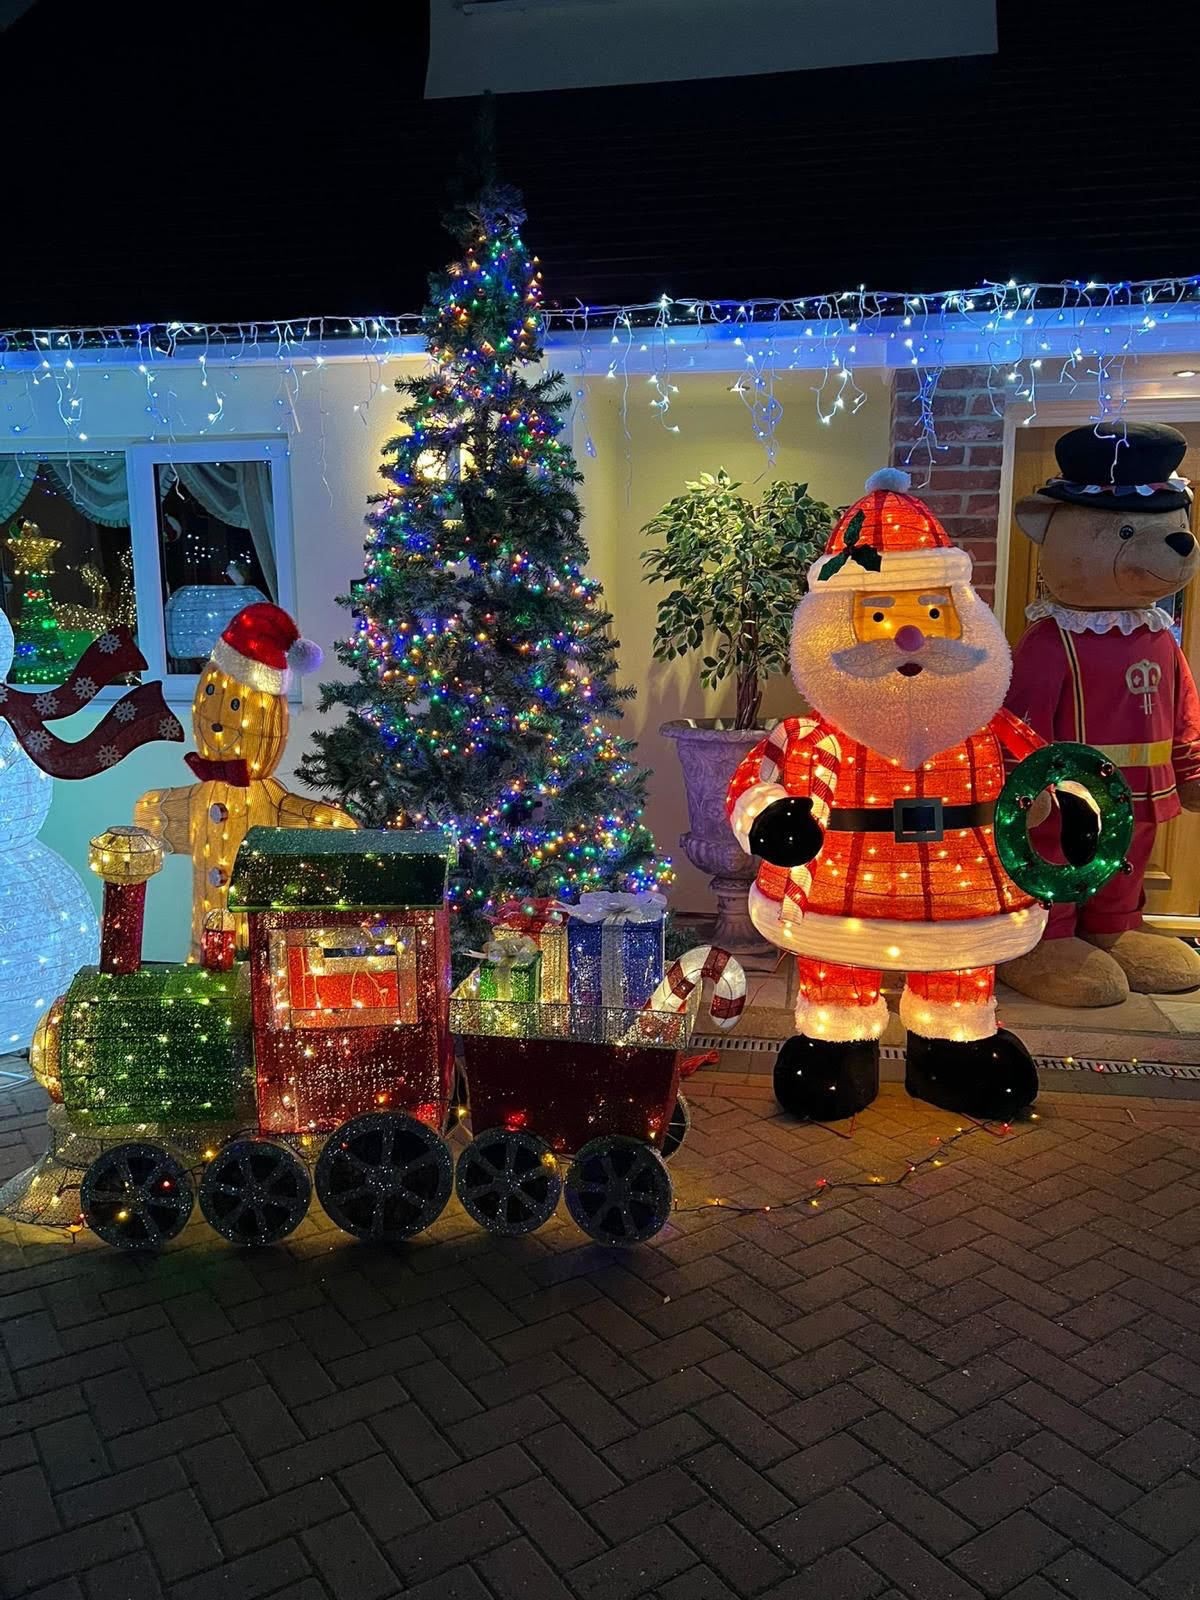 Lit-up - The decorations and lights stretch inside and outside of her house-turned-grotto